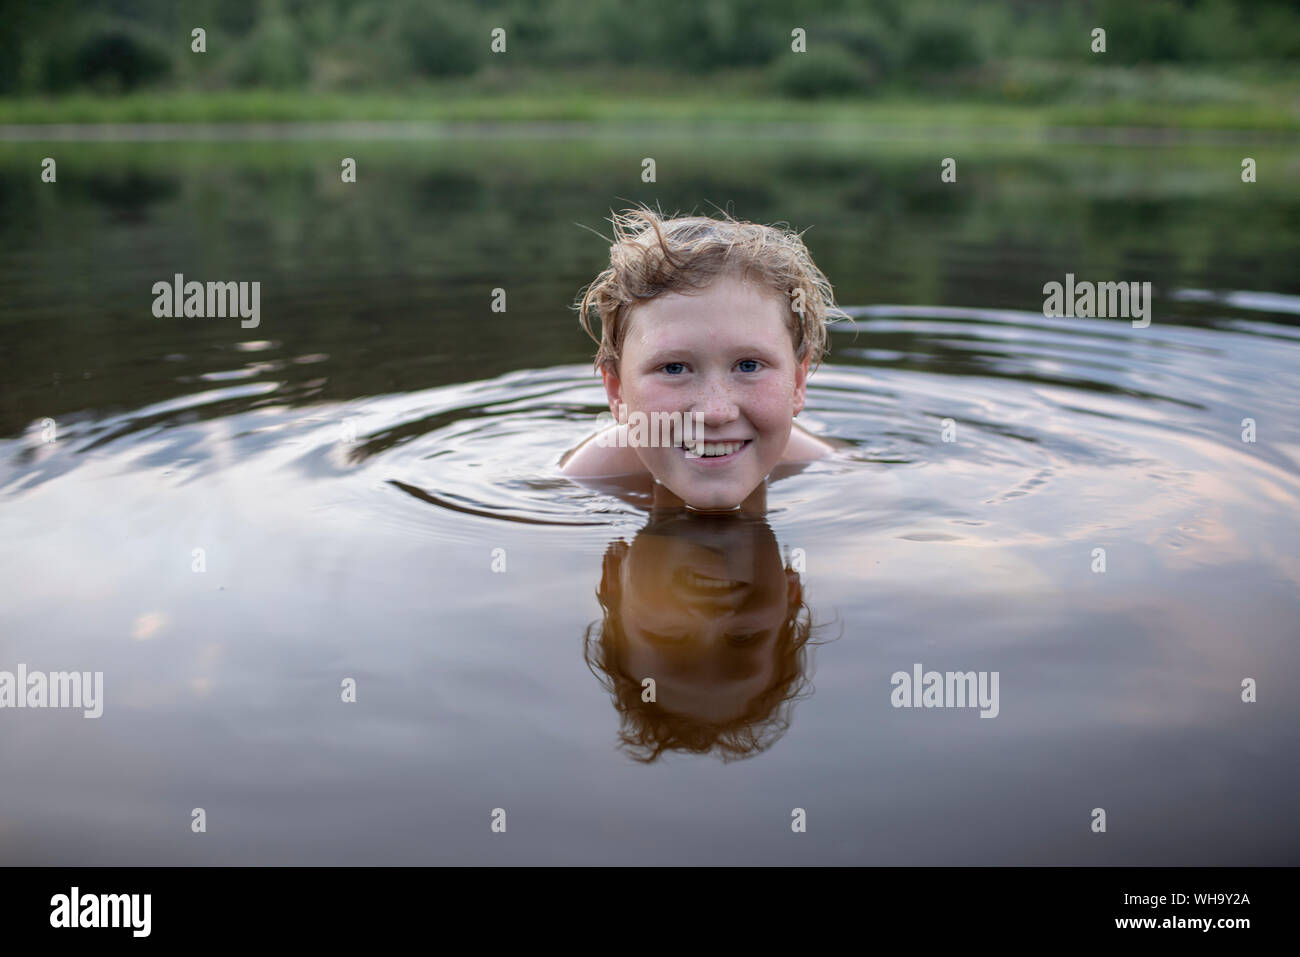 Portrait of smiling boy swimming in a lake Banque D'Images